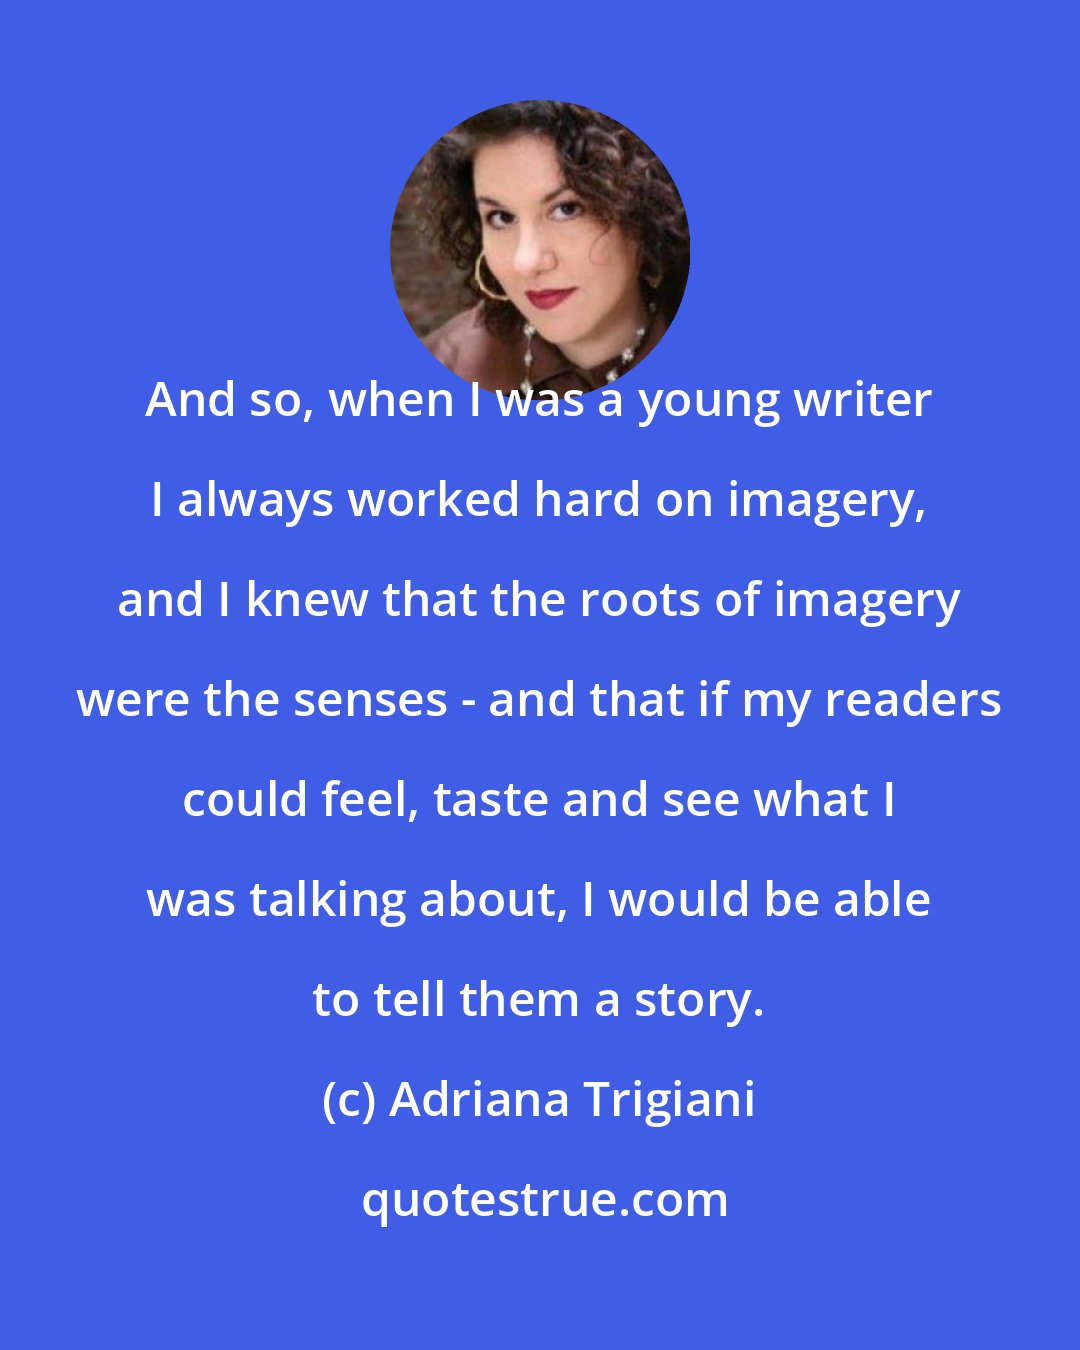 Adriana Trigiani: And so, when I was a young writer I always worked hard on imagery, and I knew that the roots of imagery were the senses - and that if my readers could feel, taste and see what I was talking about, I would be able to tell them a story.